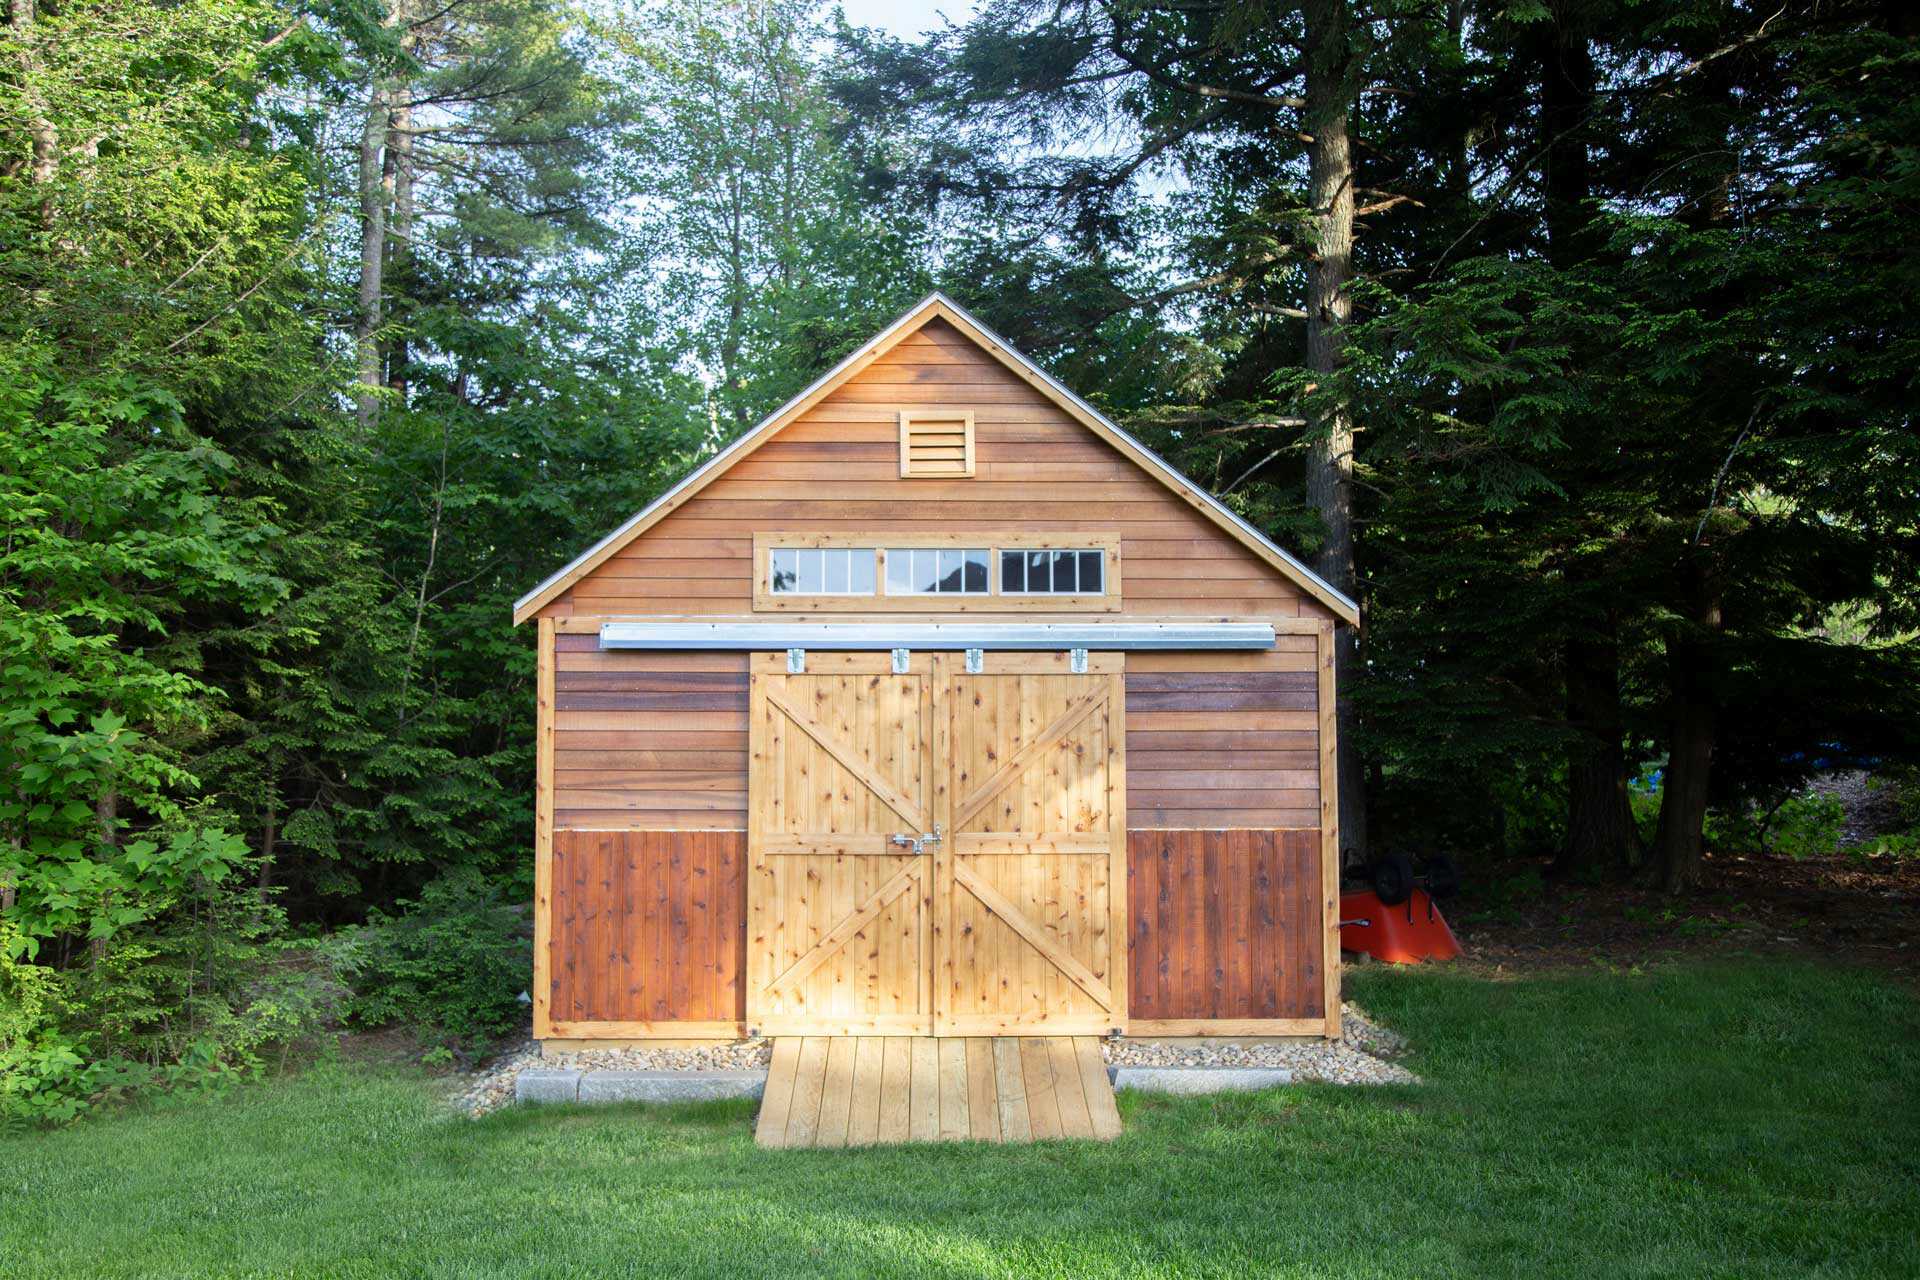 Having a Shed Built on Site? How to Prepare